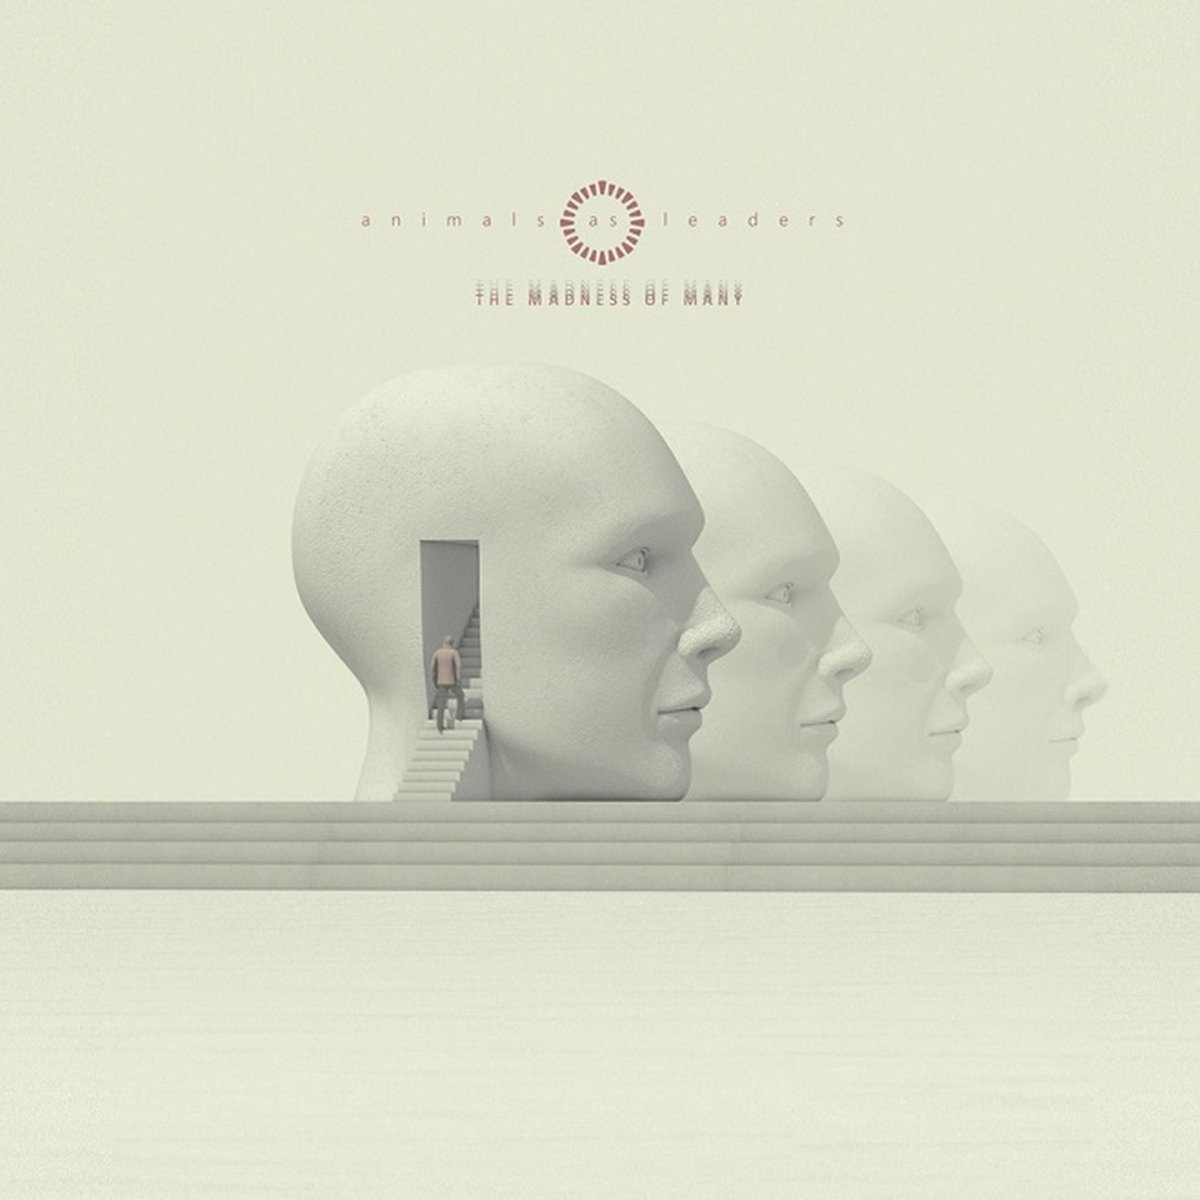 Disco de vinil Animals As Leaders - The Madness Of Many (Cream Coloured) (LP)